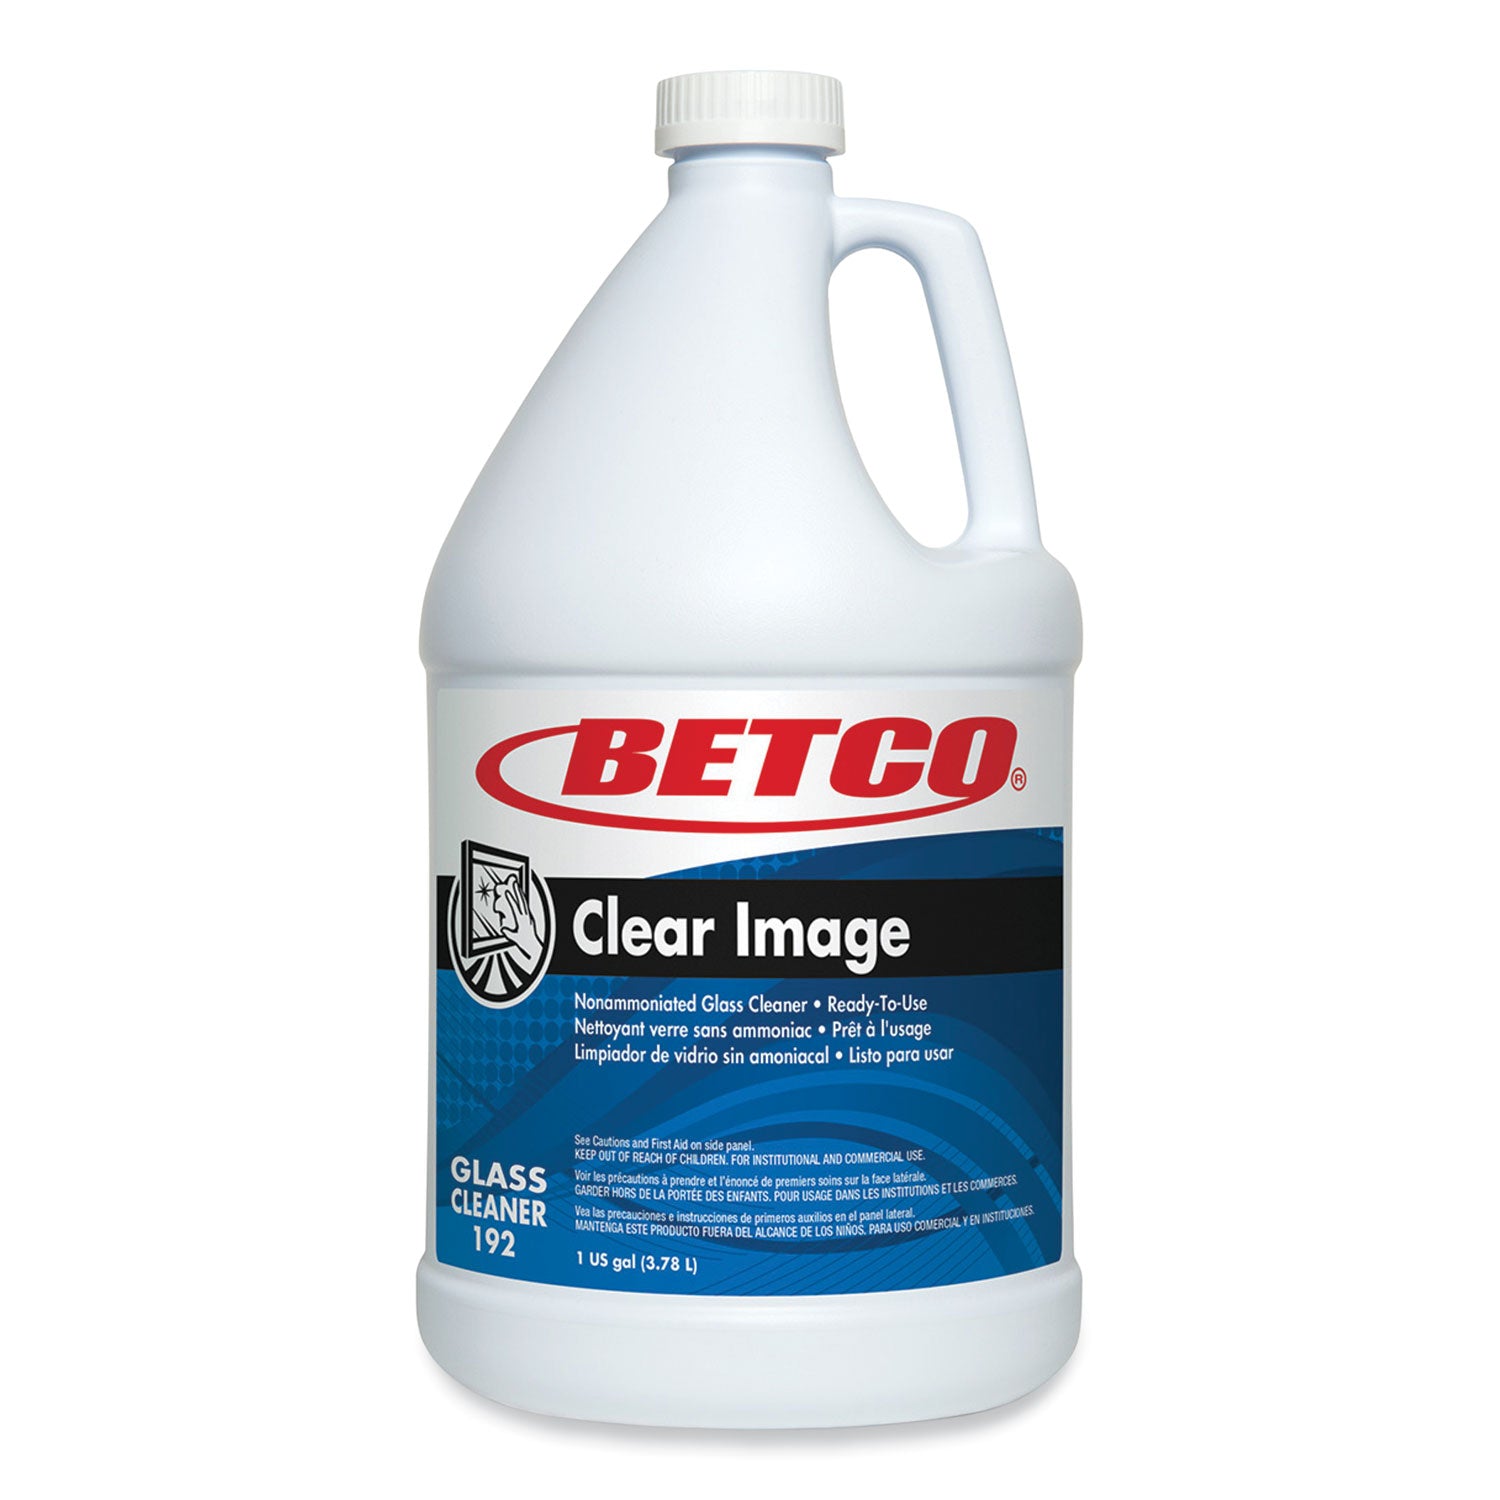 clear-image-glass-and-surface-cleaner-rain-fresh-scent-1-gal-bottle-4-carton_bet1920400 - 1